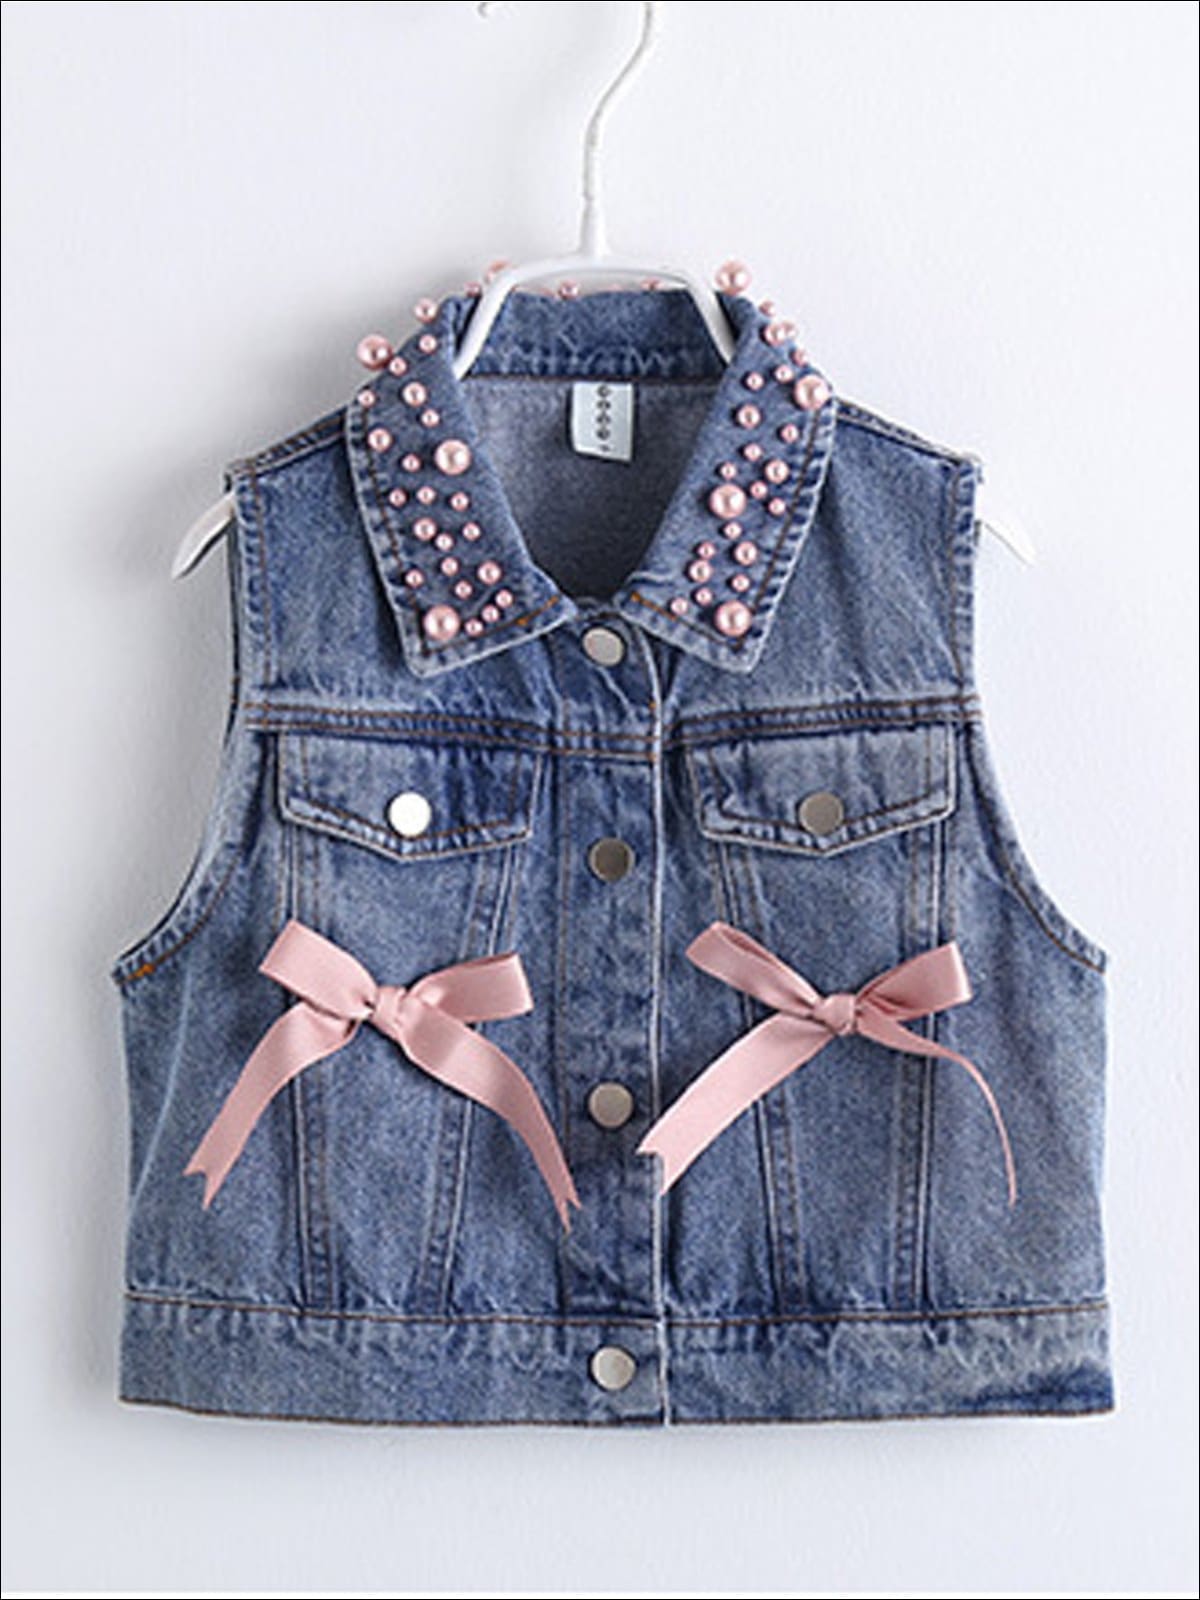 Girls Pink Long Sleeve Tutu Dress with Pearl Embellished & Bow Denim Vest - Girls Fall Casual Dress